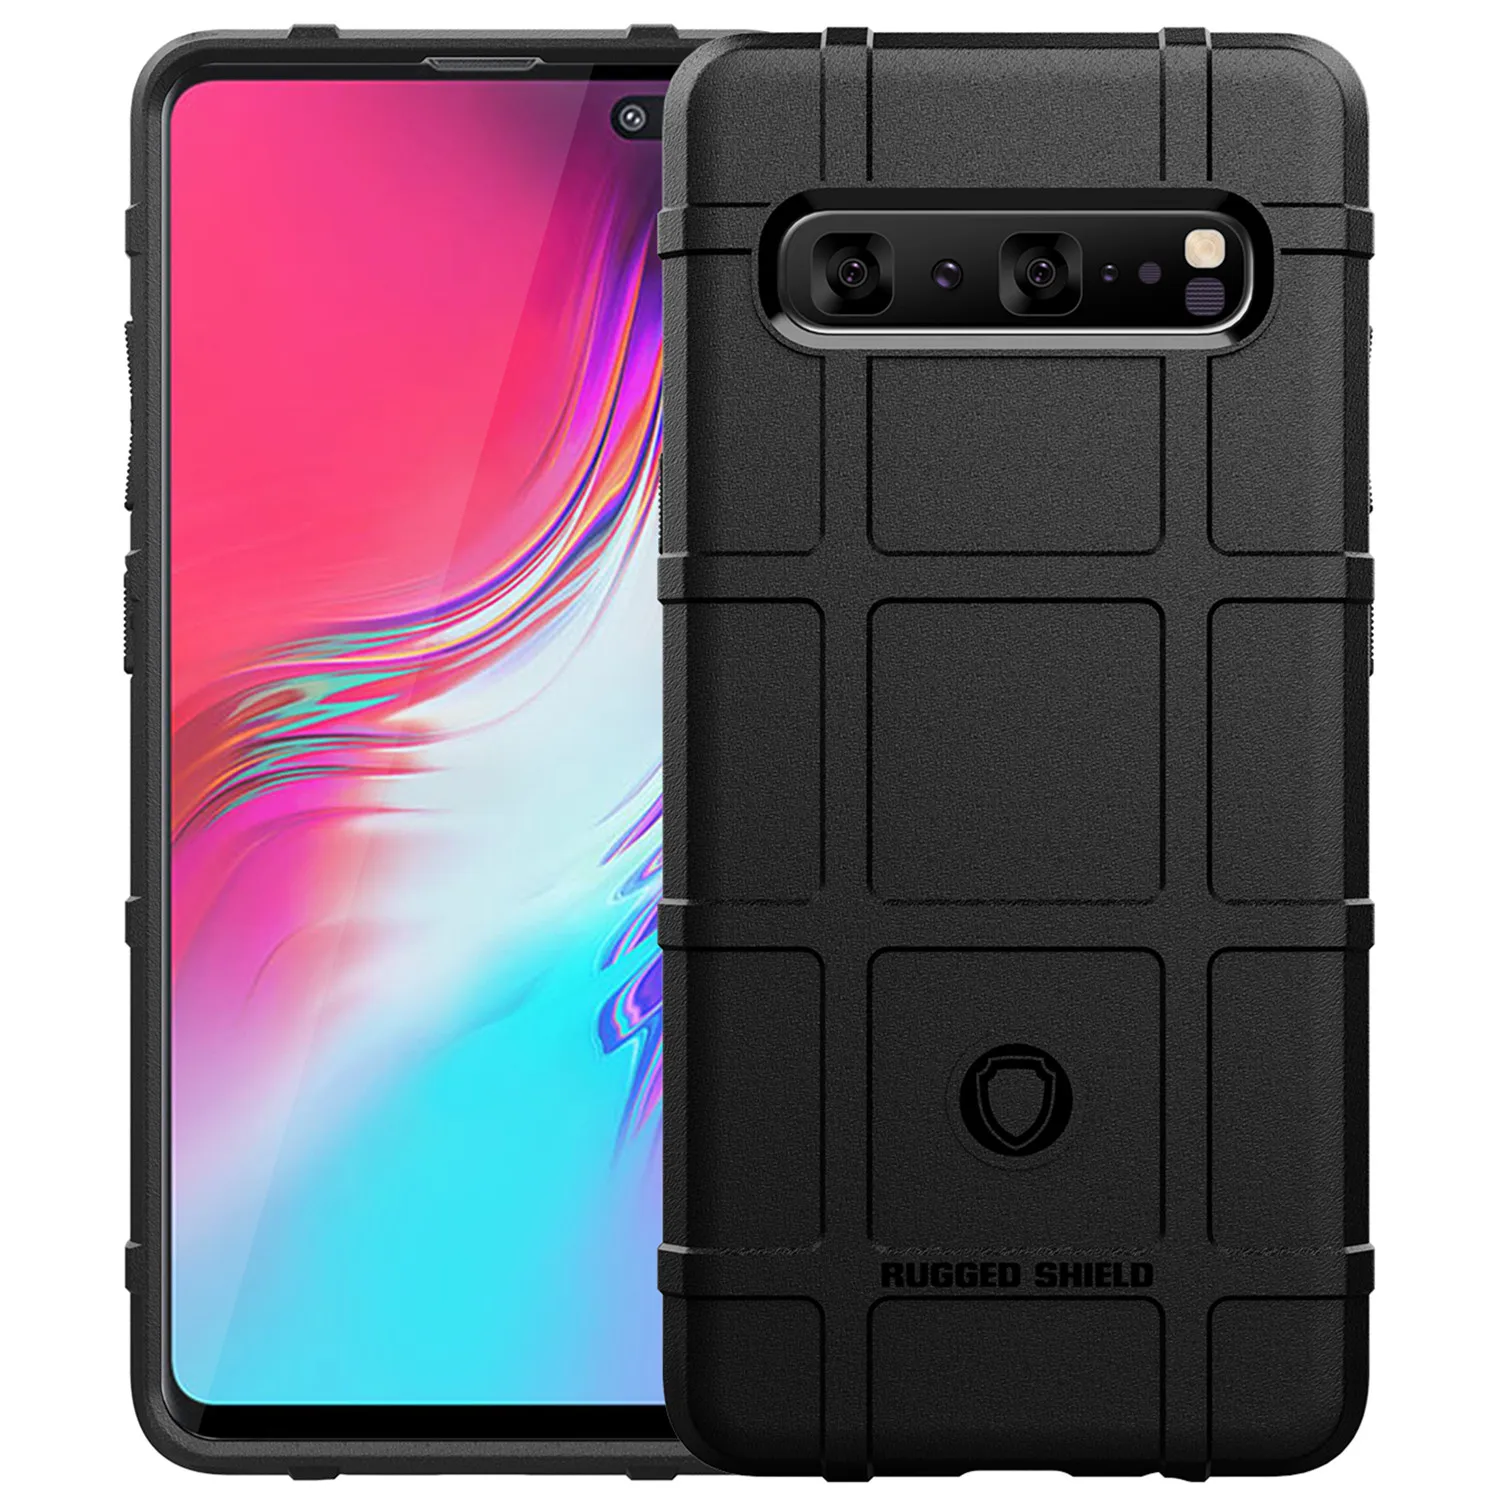 

Shockproof Case for Galaxy S10 5G s10+ S10e s10 Shield Rubber Cover for Samsung S10 plus Galaxy s10 lite Armor Silicone Case